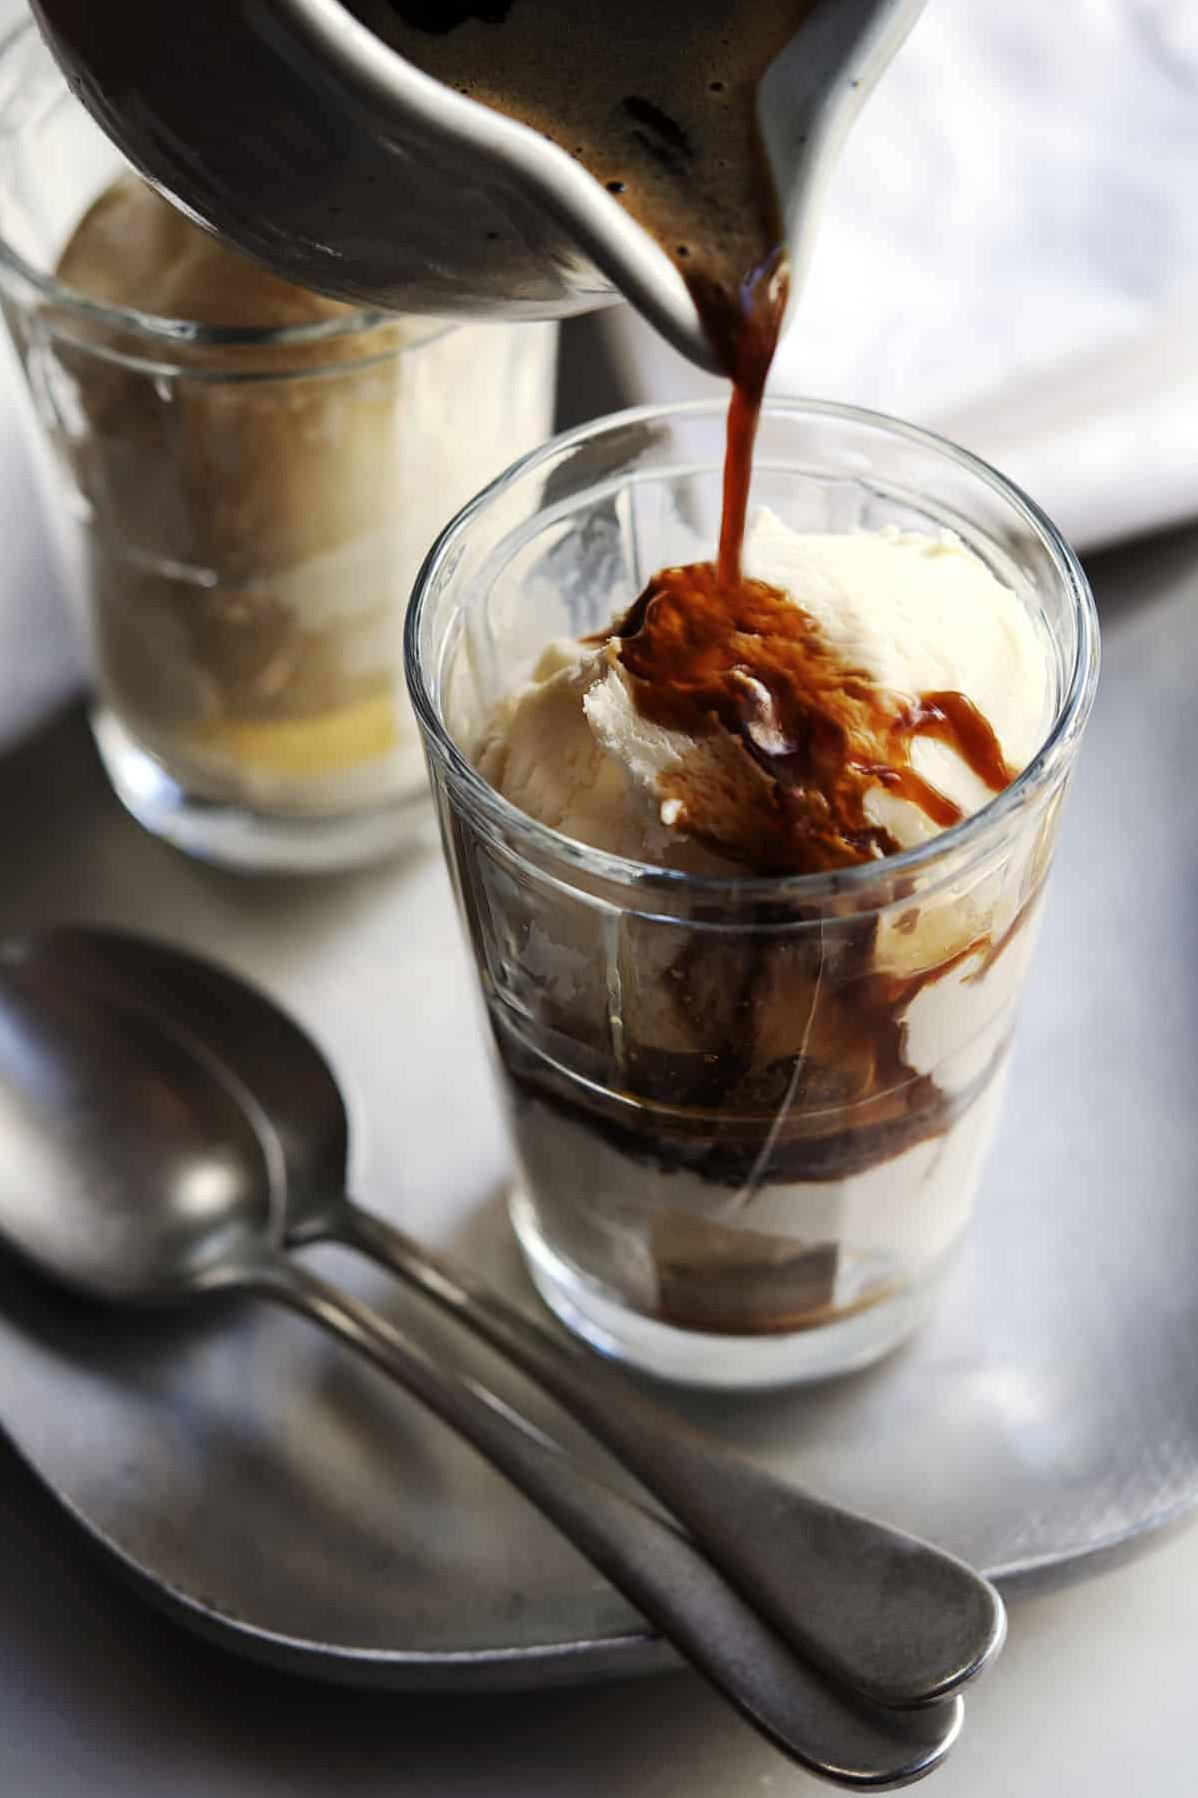  It doesn't get any easier (or more delicious) than the Vanilla Ice Cream Affogato - two ingredients and a few minutes of your time.